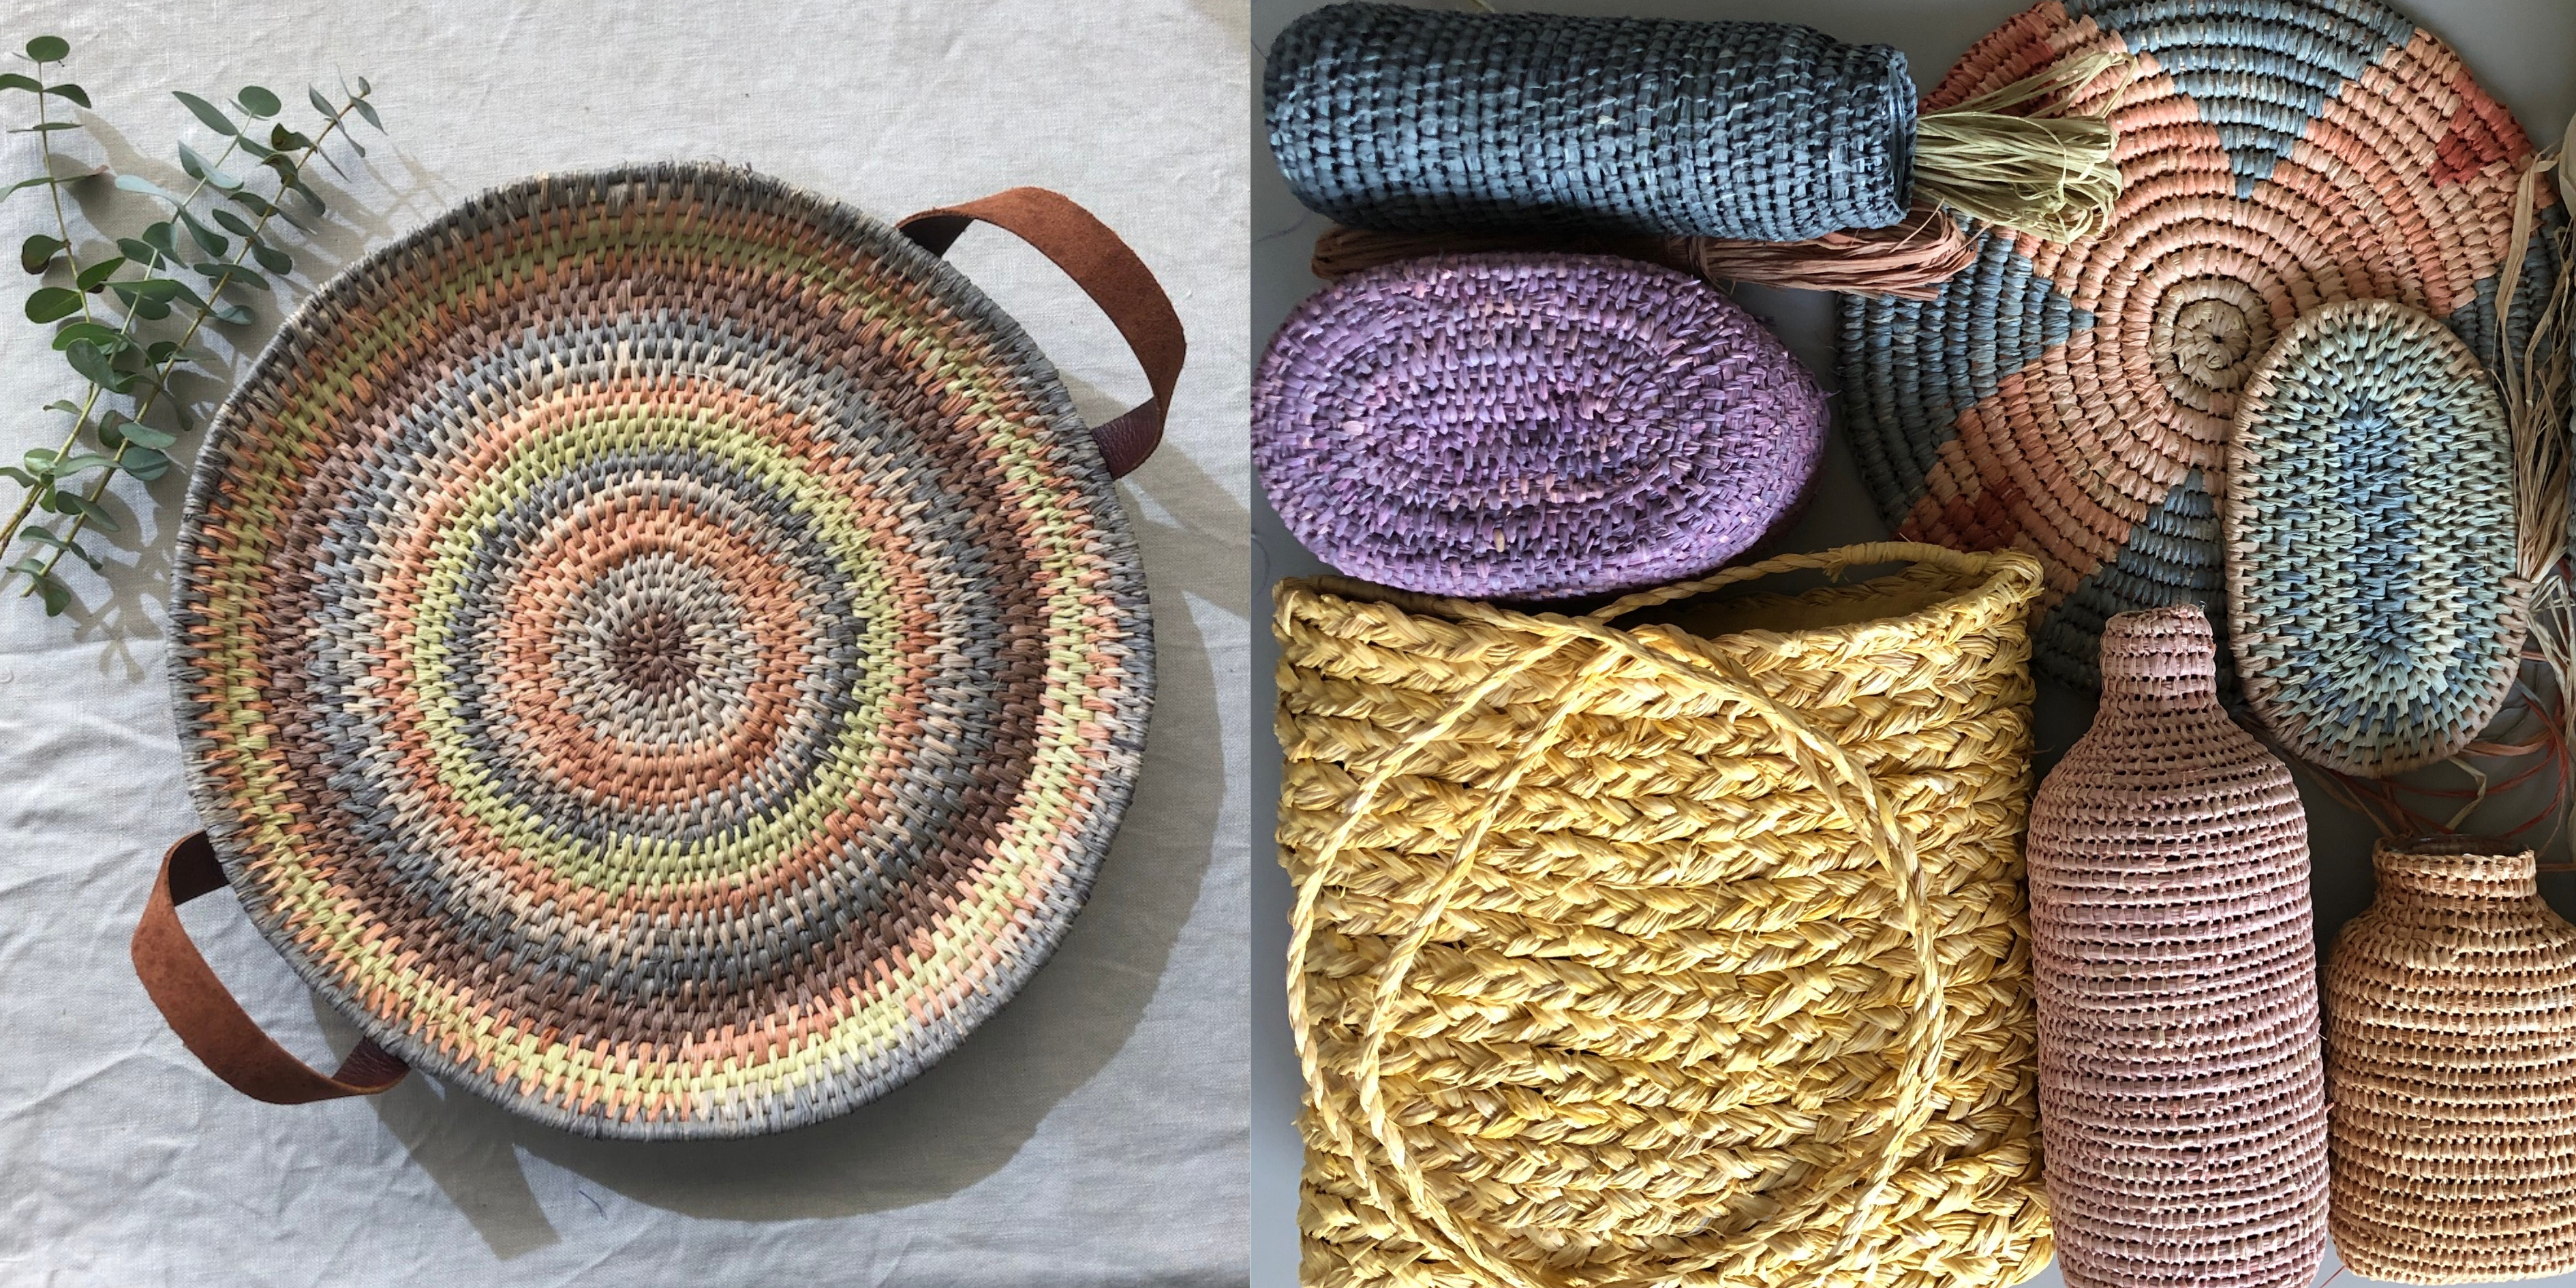 This is a picture of colourful raffia baskets